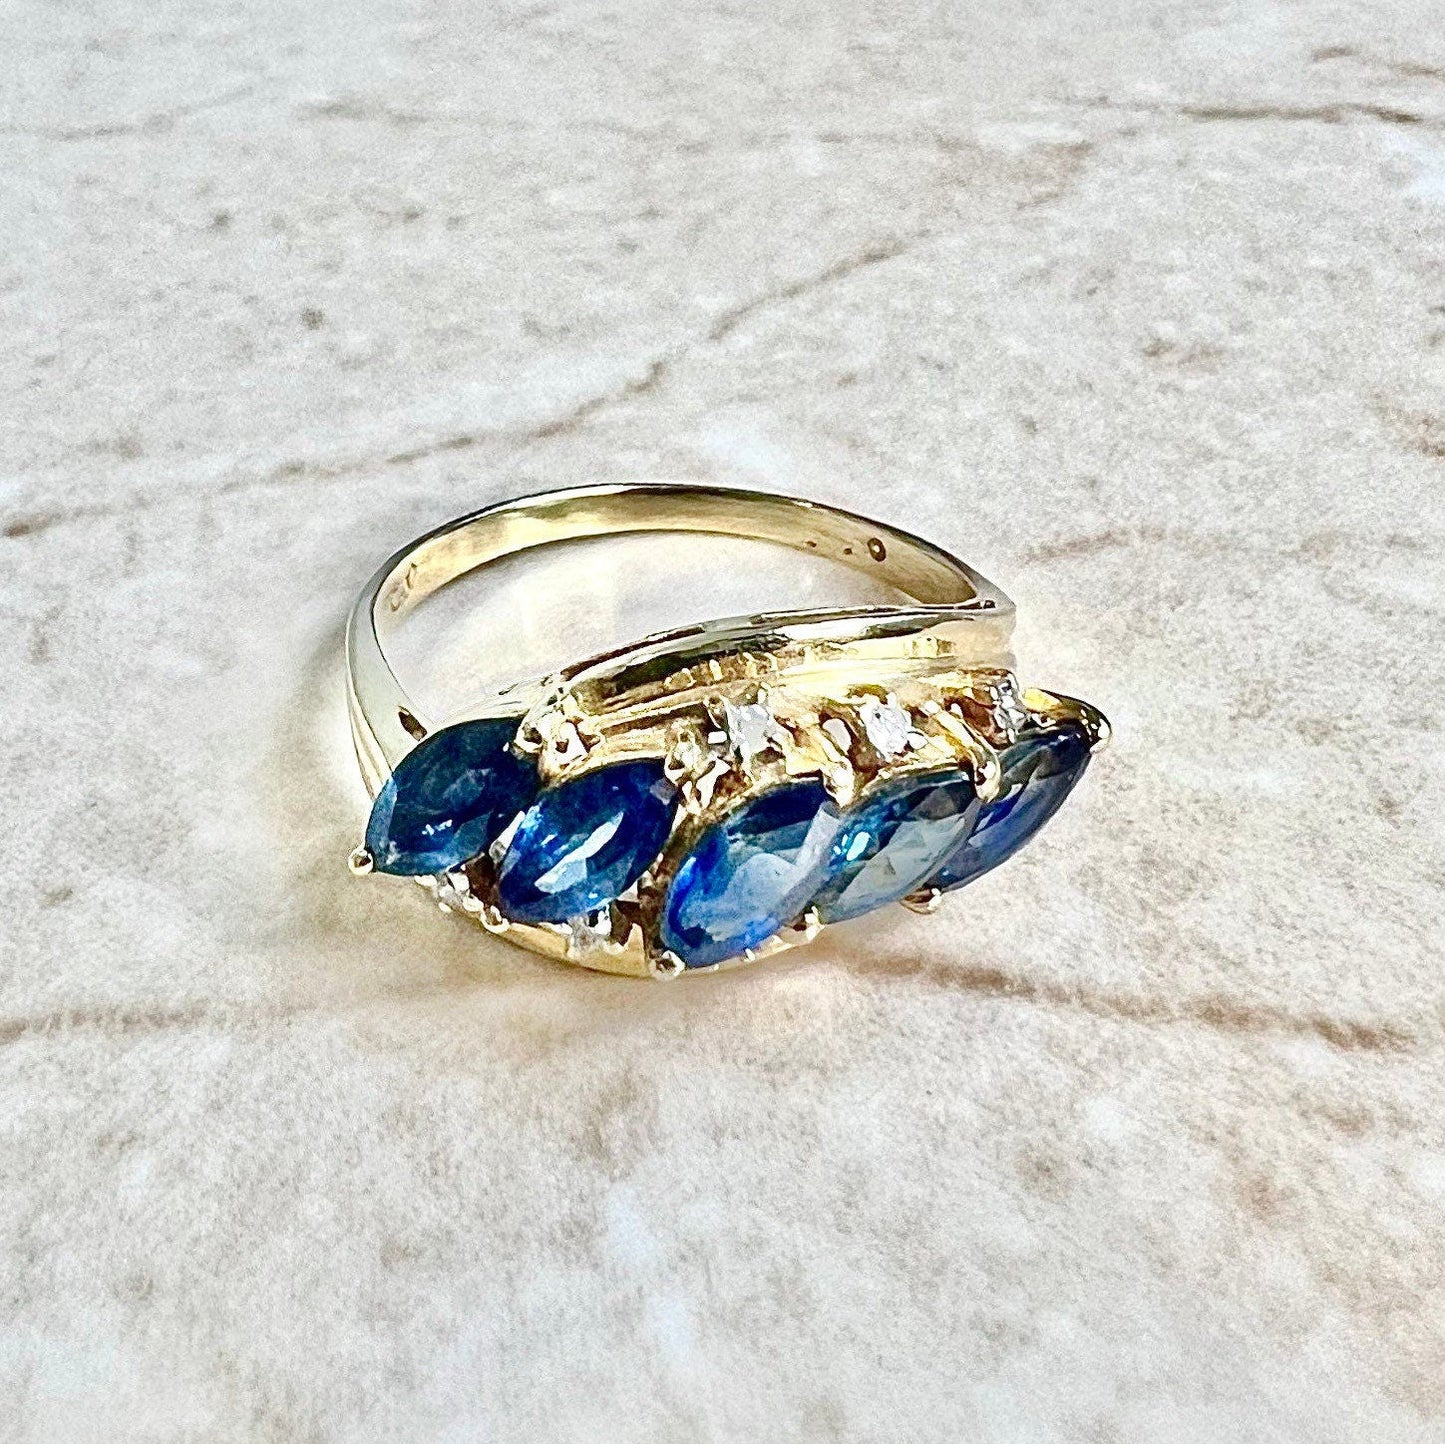 Vintage 14K Diamond & Sapphire Band Ring - Yellow Gold Sapphire Ring - Cocktail Ring - September Birthstone -Birthday Gift-Best Gift For Her